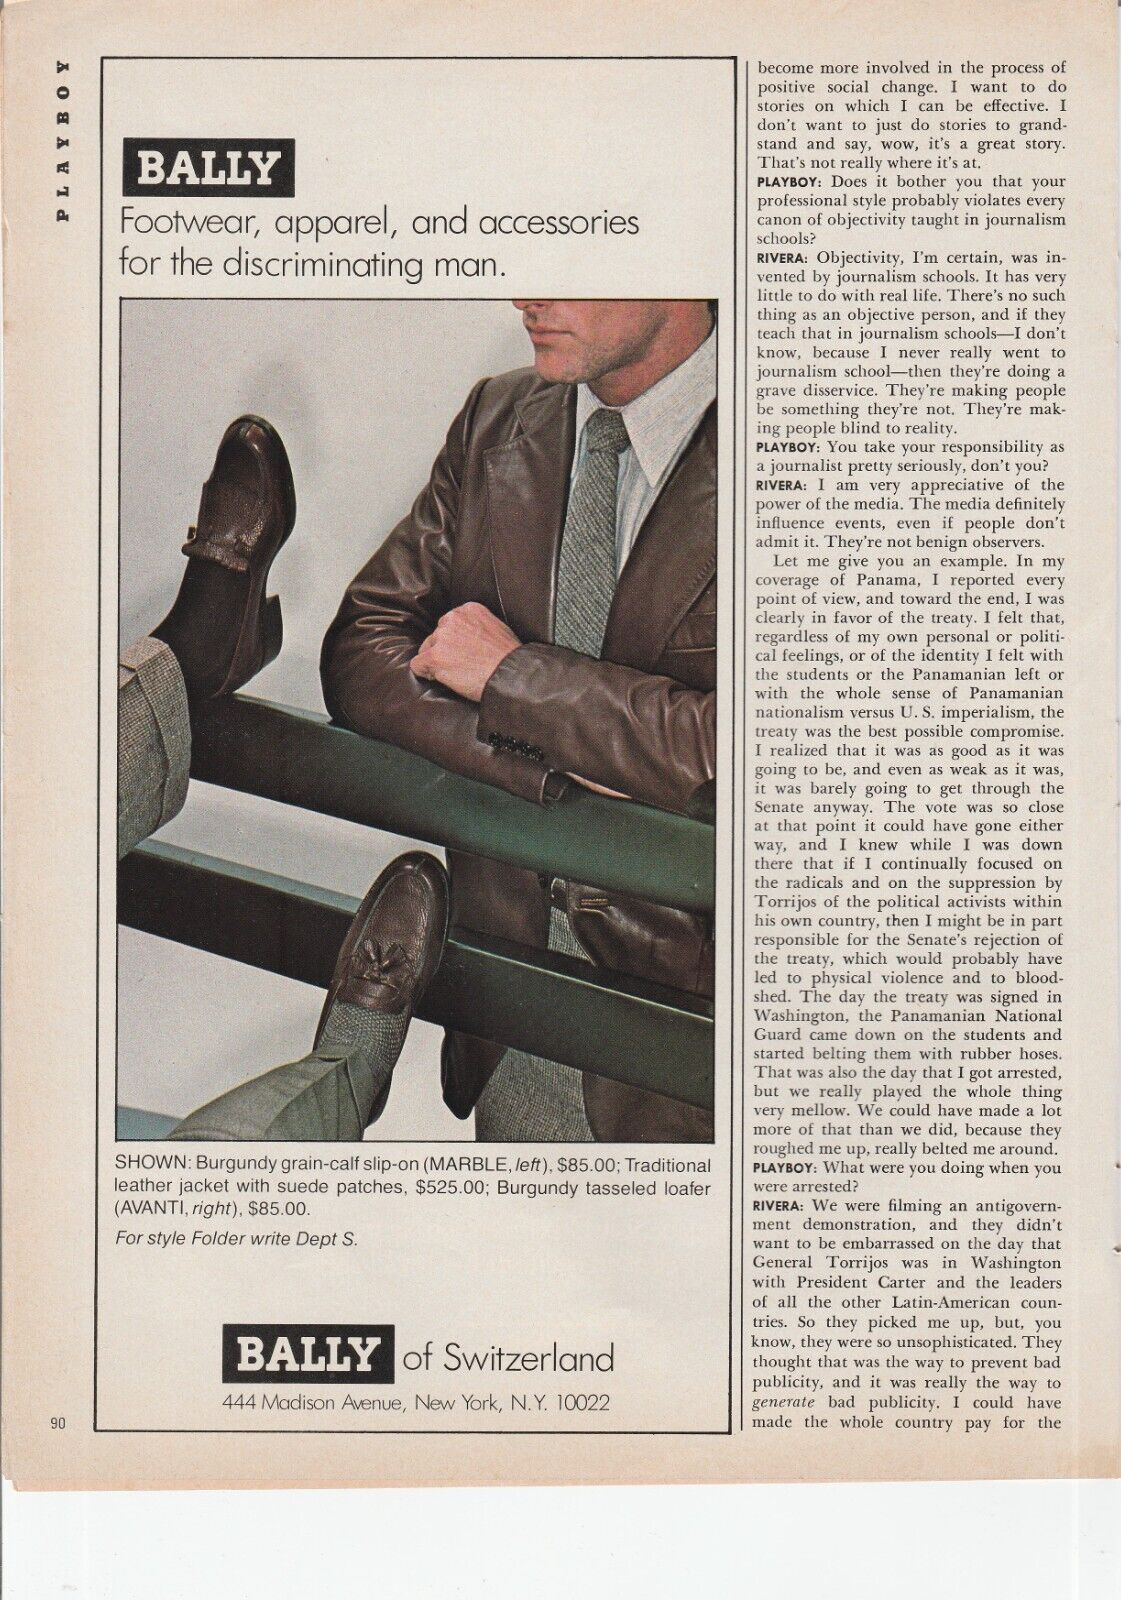 1978 Bally of Switzerland Shoes Men's Leather Shoes and Jacket 1978 Print Ad